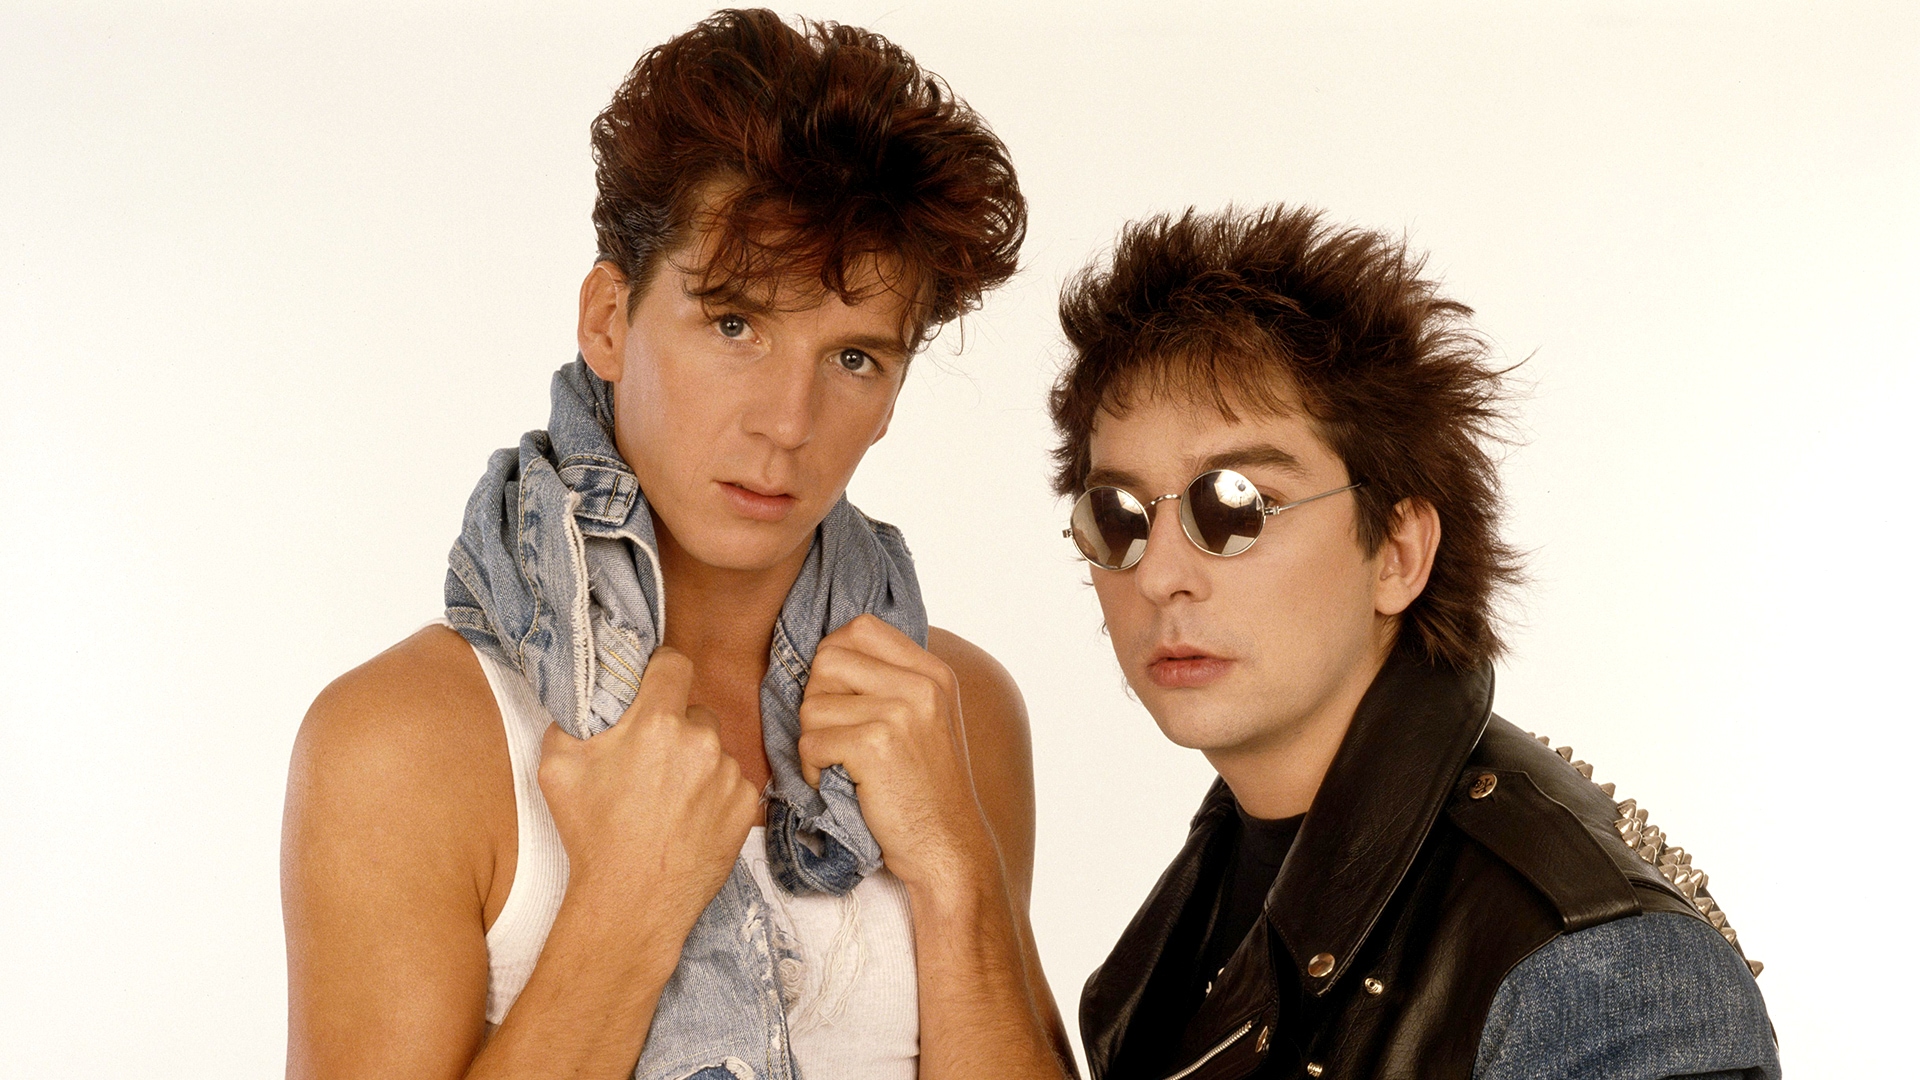 Rise To The Occasion 1988 av Climie Fisher